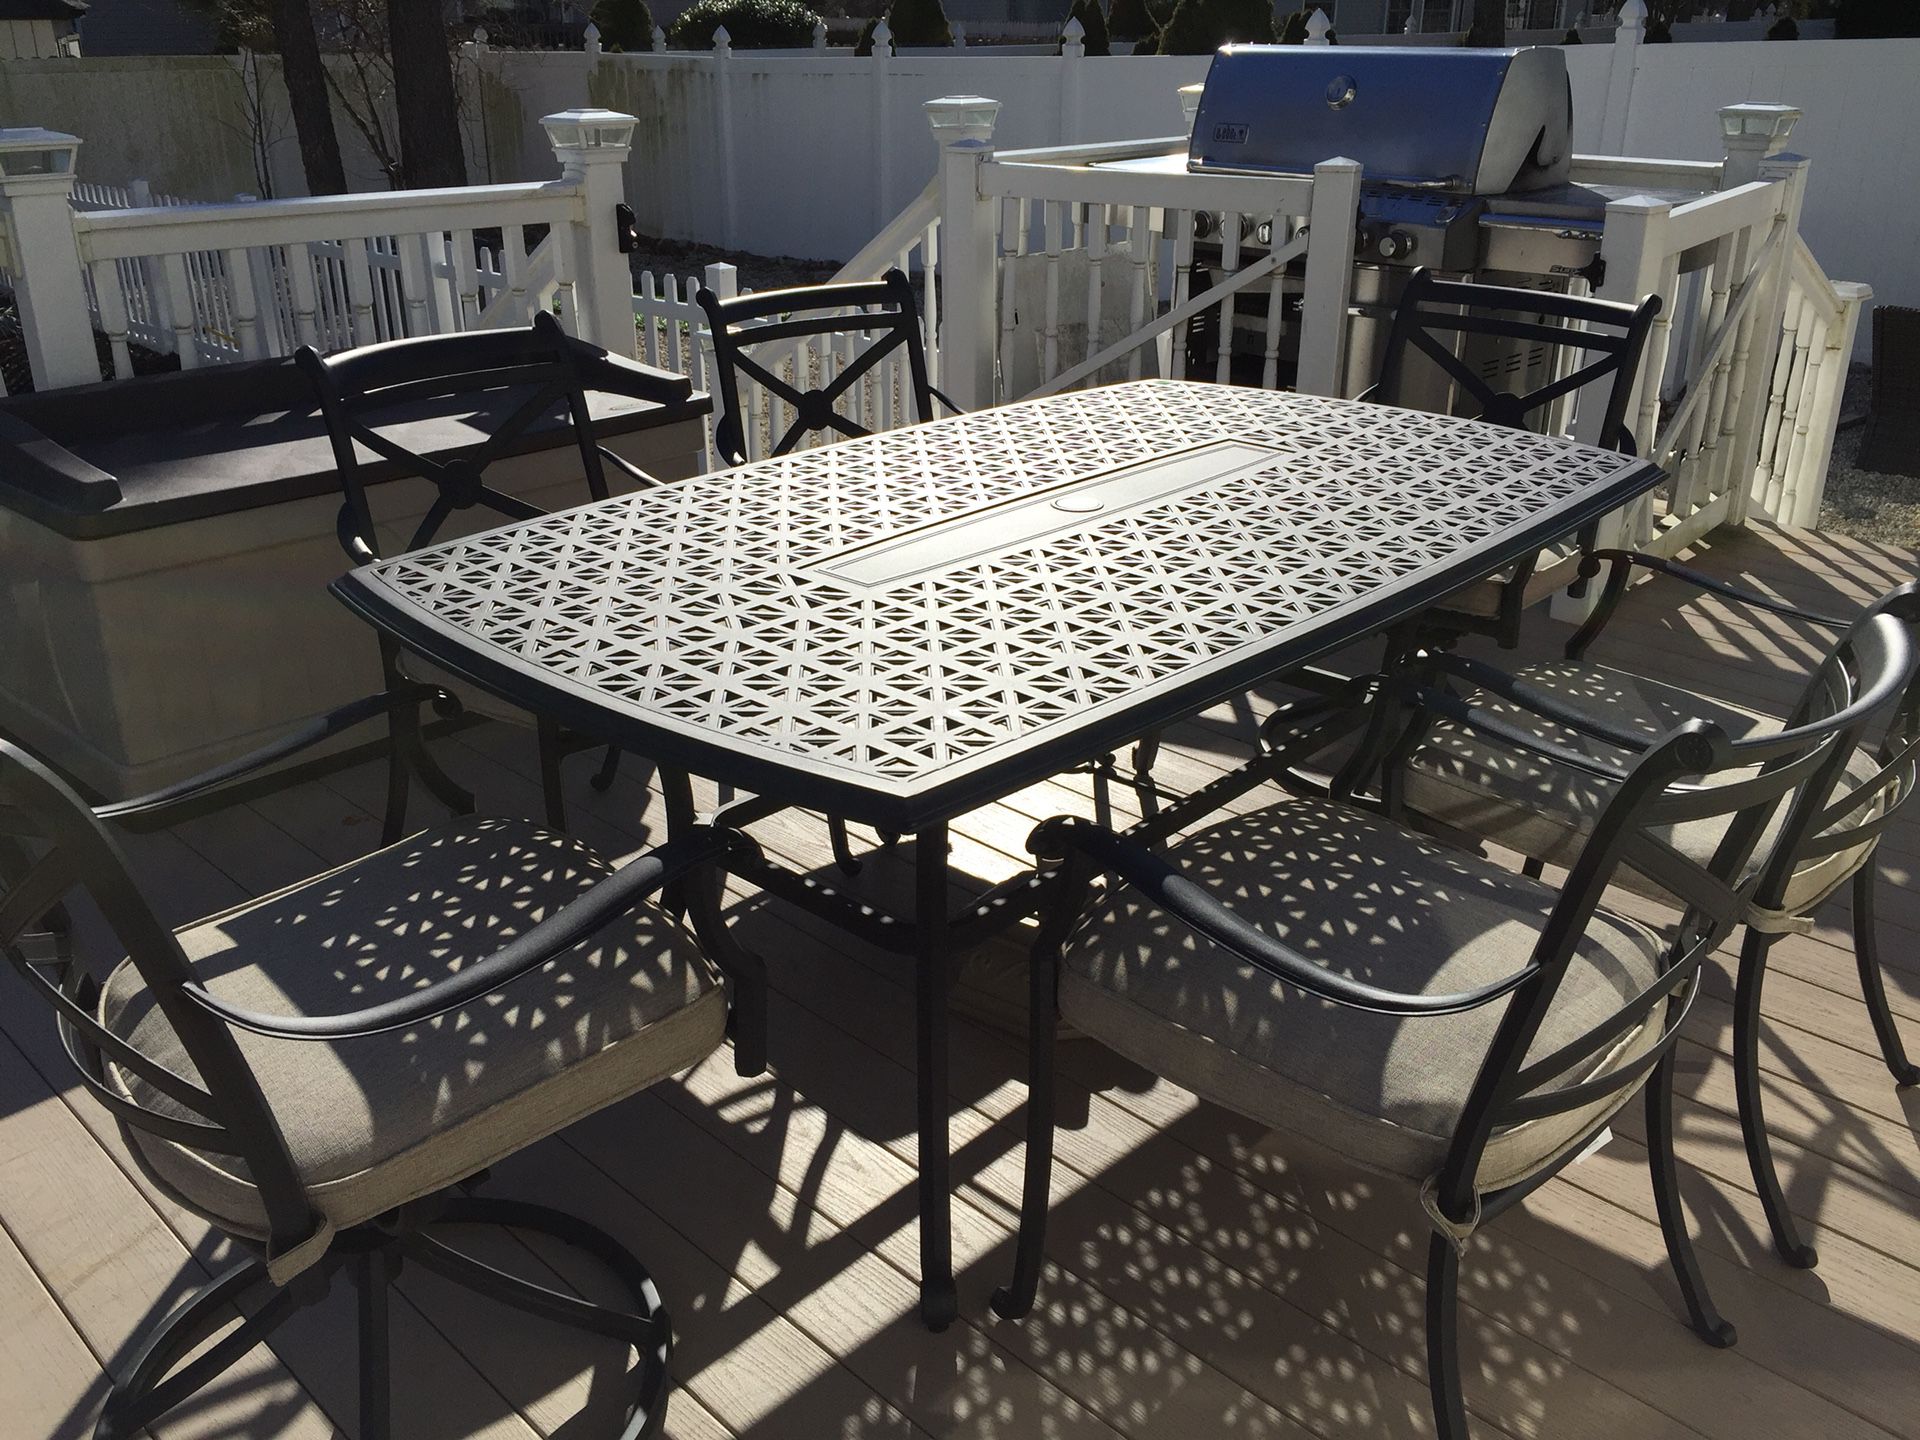 Outdoor patio furniture cast aluminum dinning set. NEW IN BOXES! Warehouse sale.